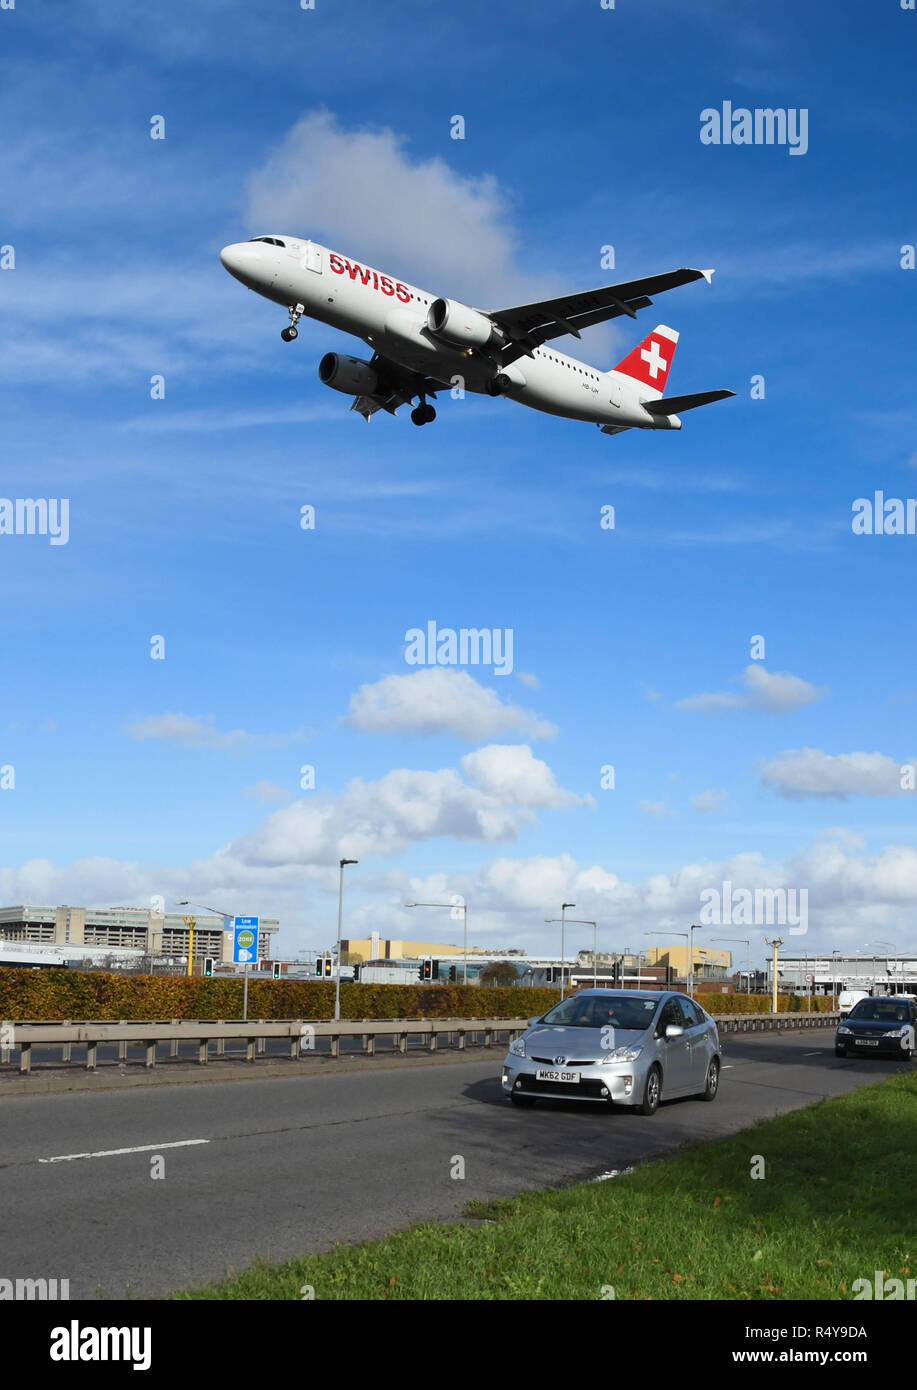 LONDON, ENGLAND - NOVEMBER 2018: Swiss airliner coming into land at London Heathrow Airport passing over traffic on the A30 dual carriageway. Stock Photo